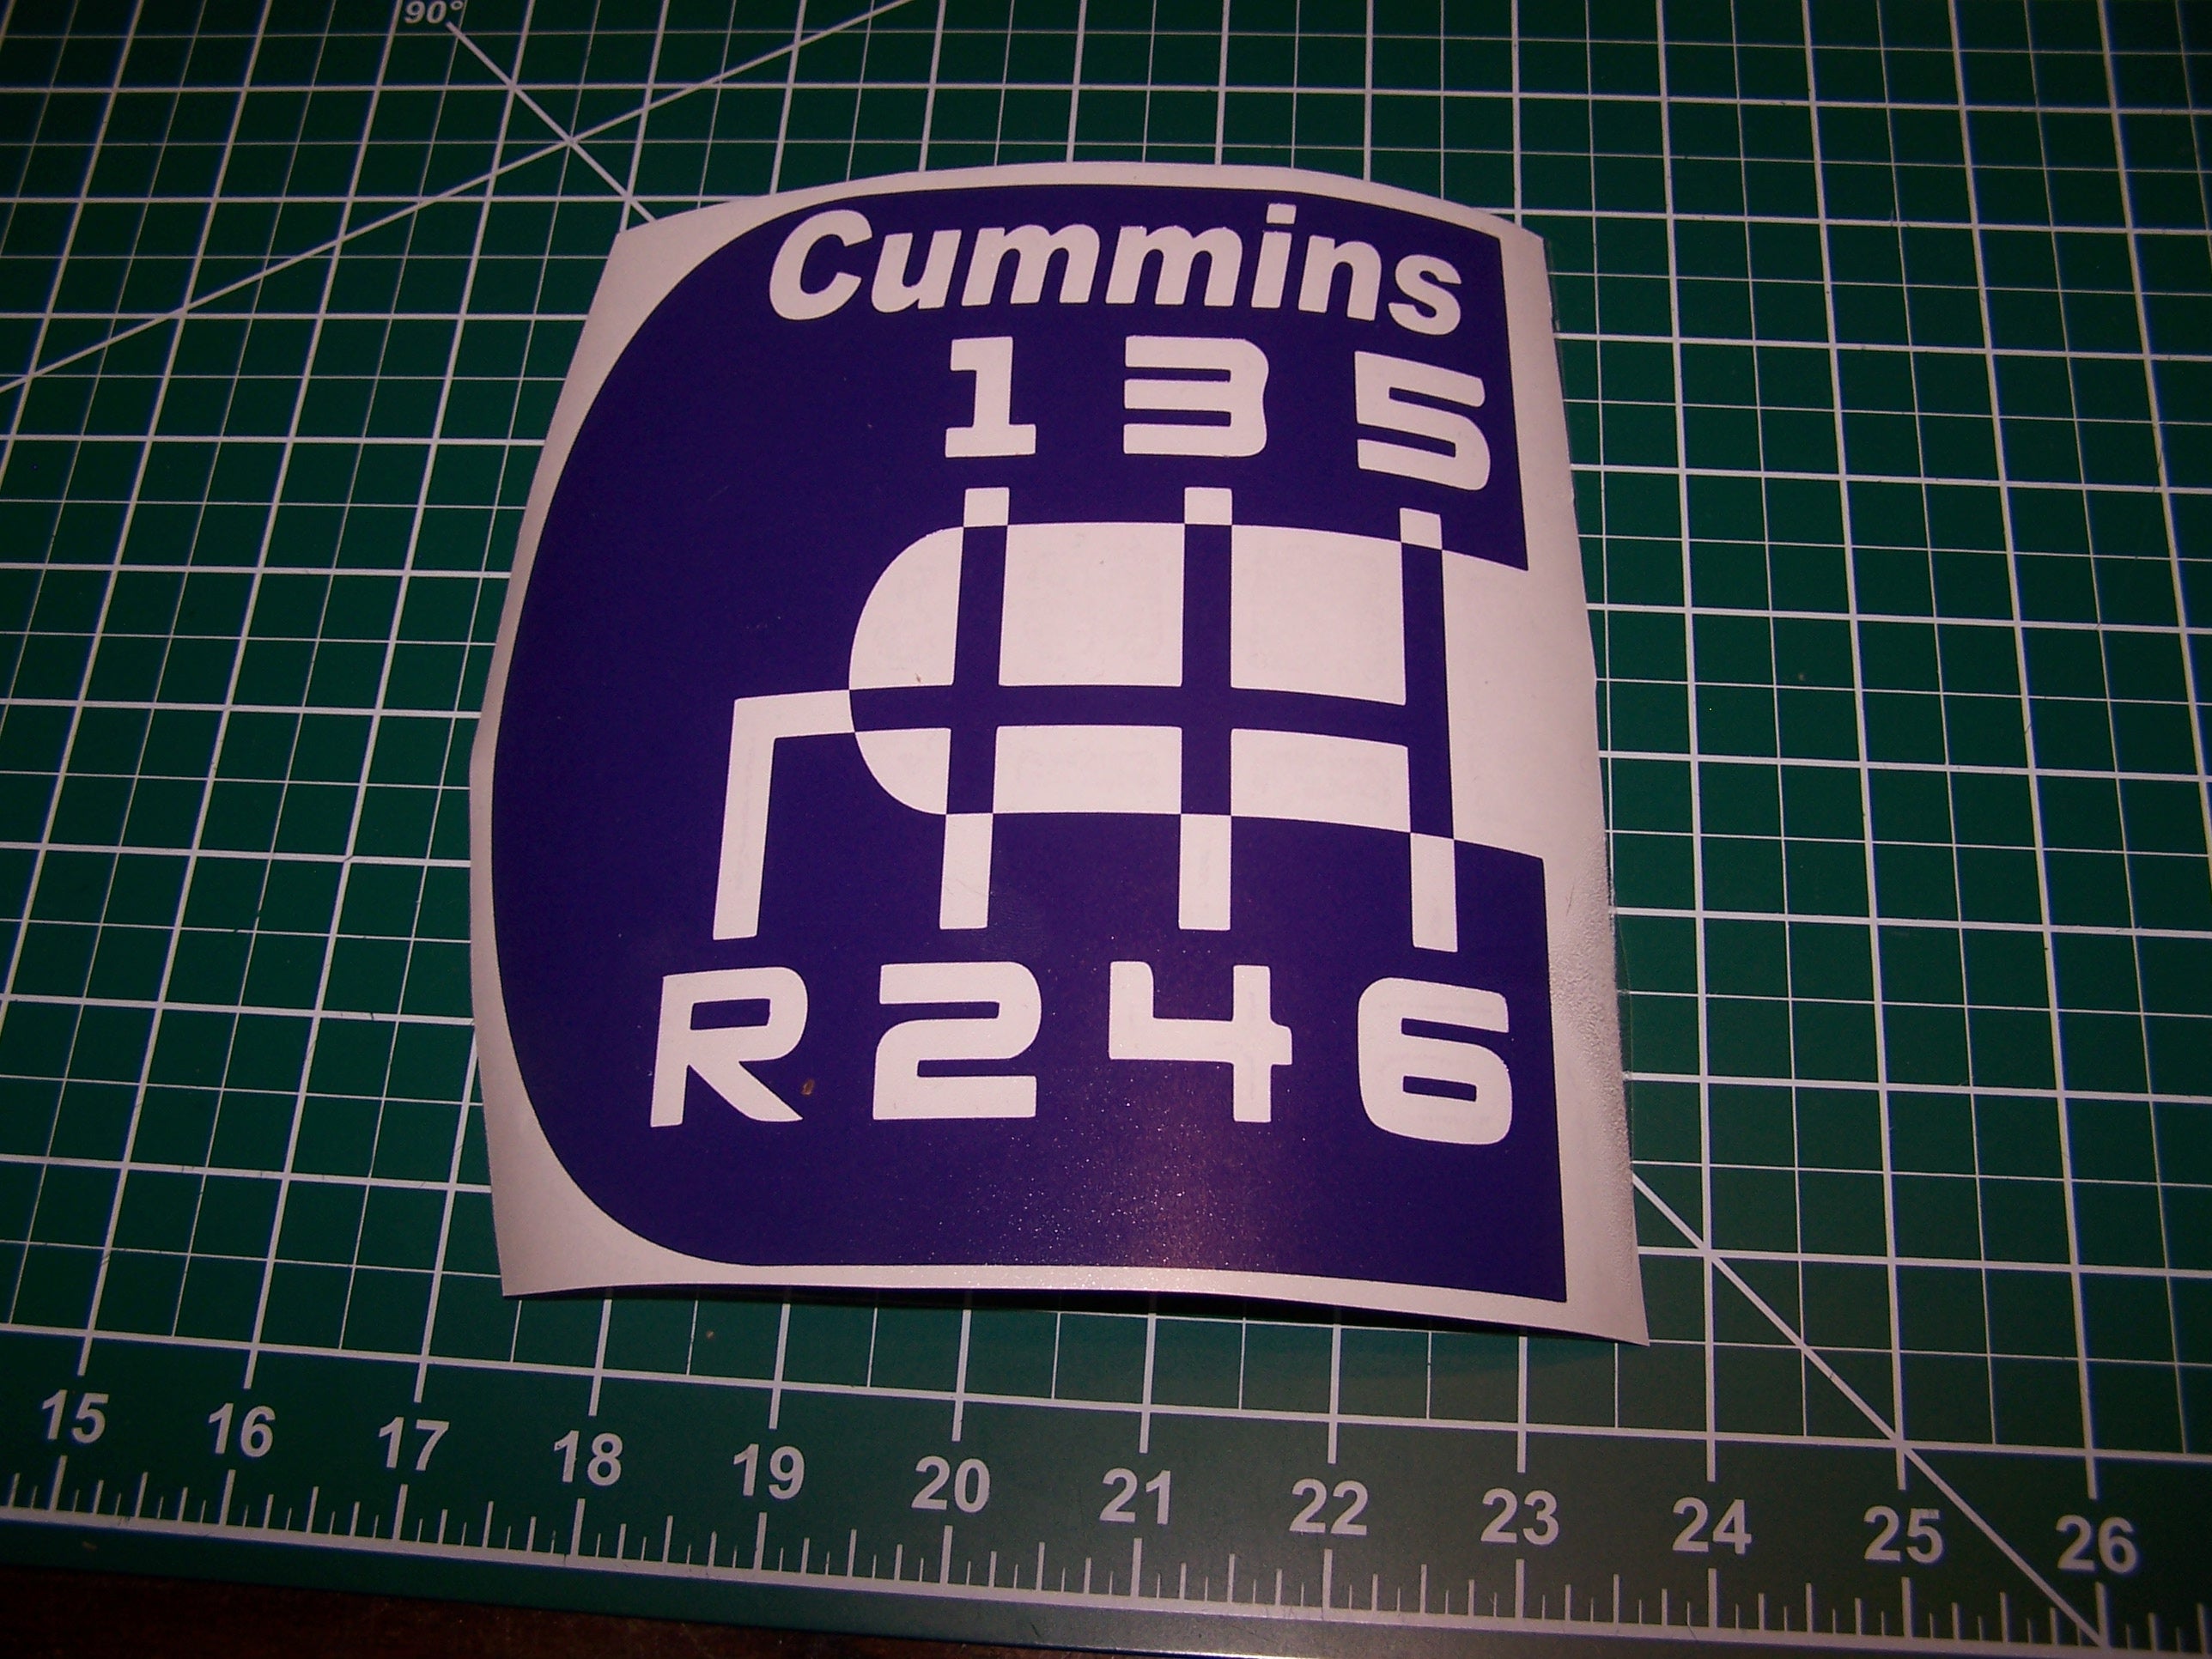 CUMMINS LOGO 6 SPEED WITH TEXT VINYL STICKER DECAL CHOOSE COLOR